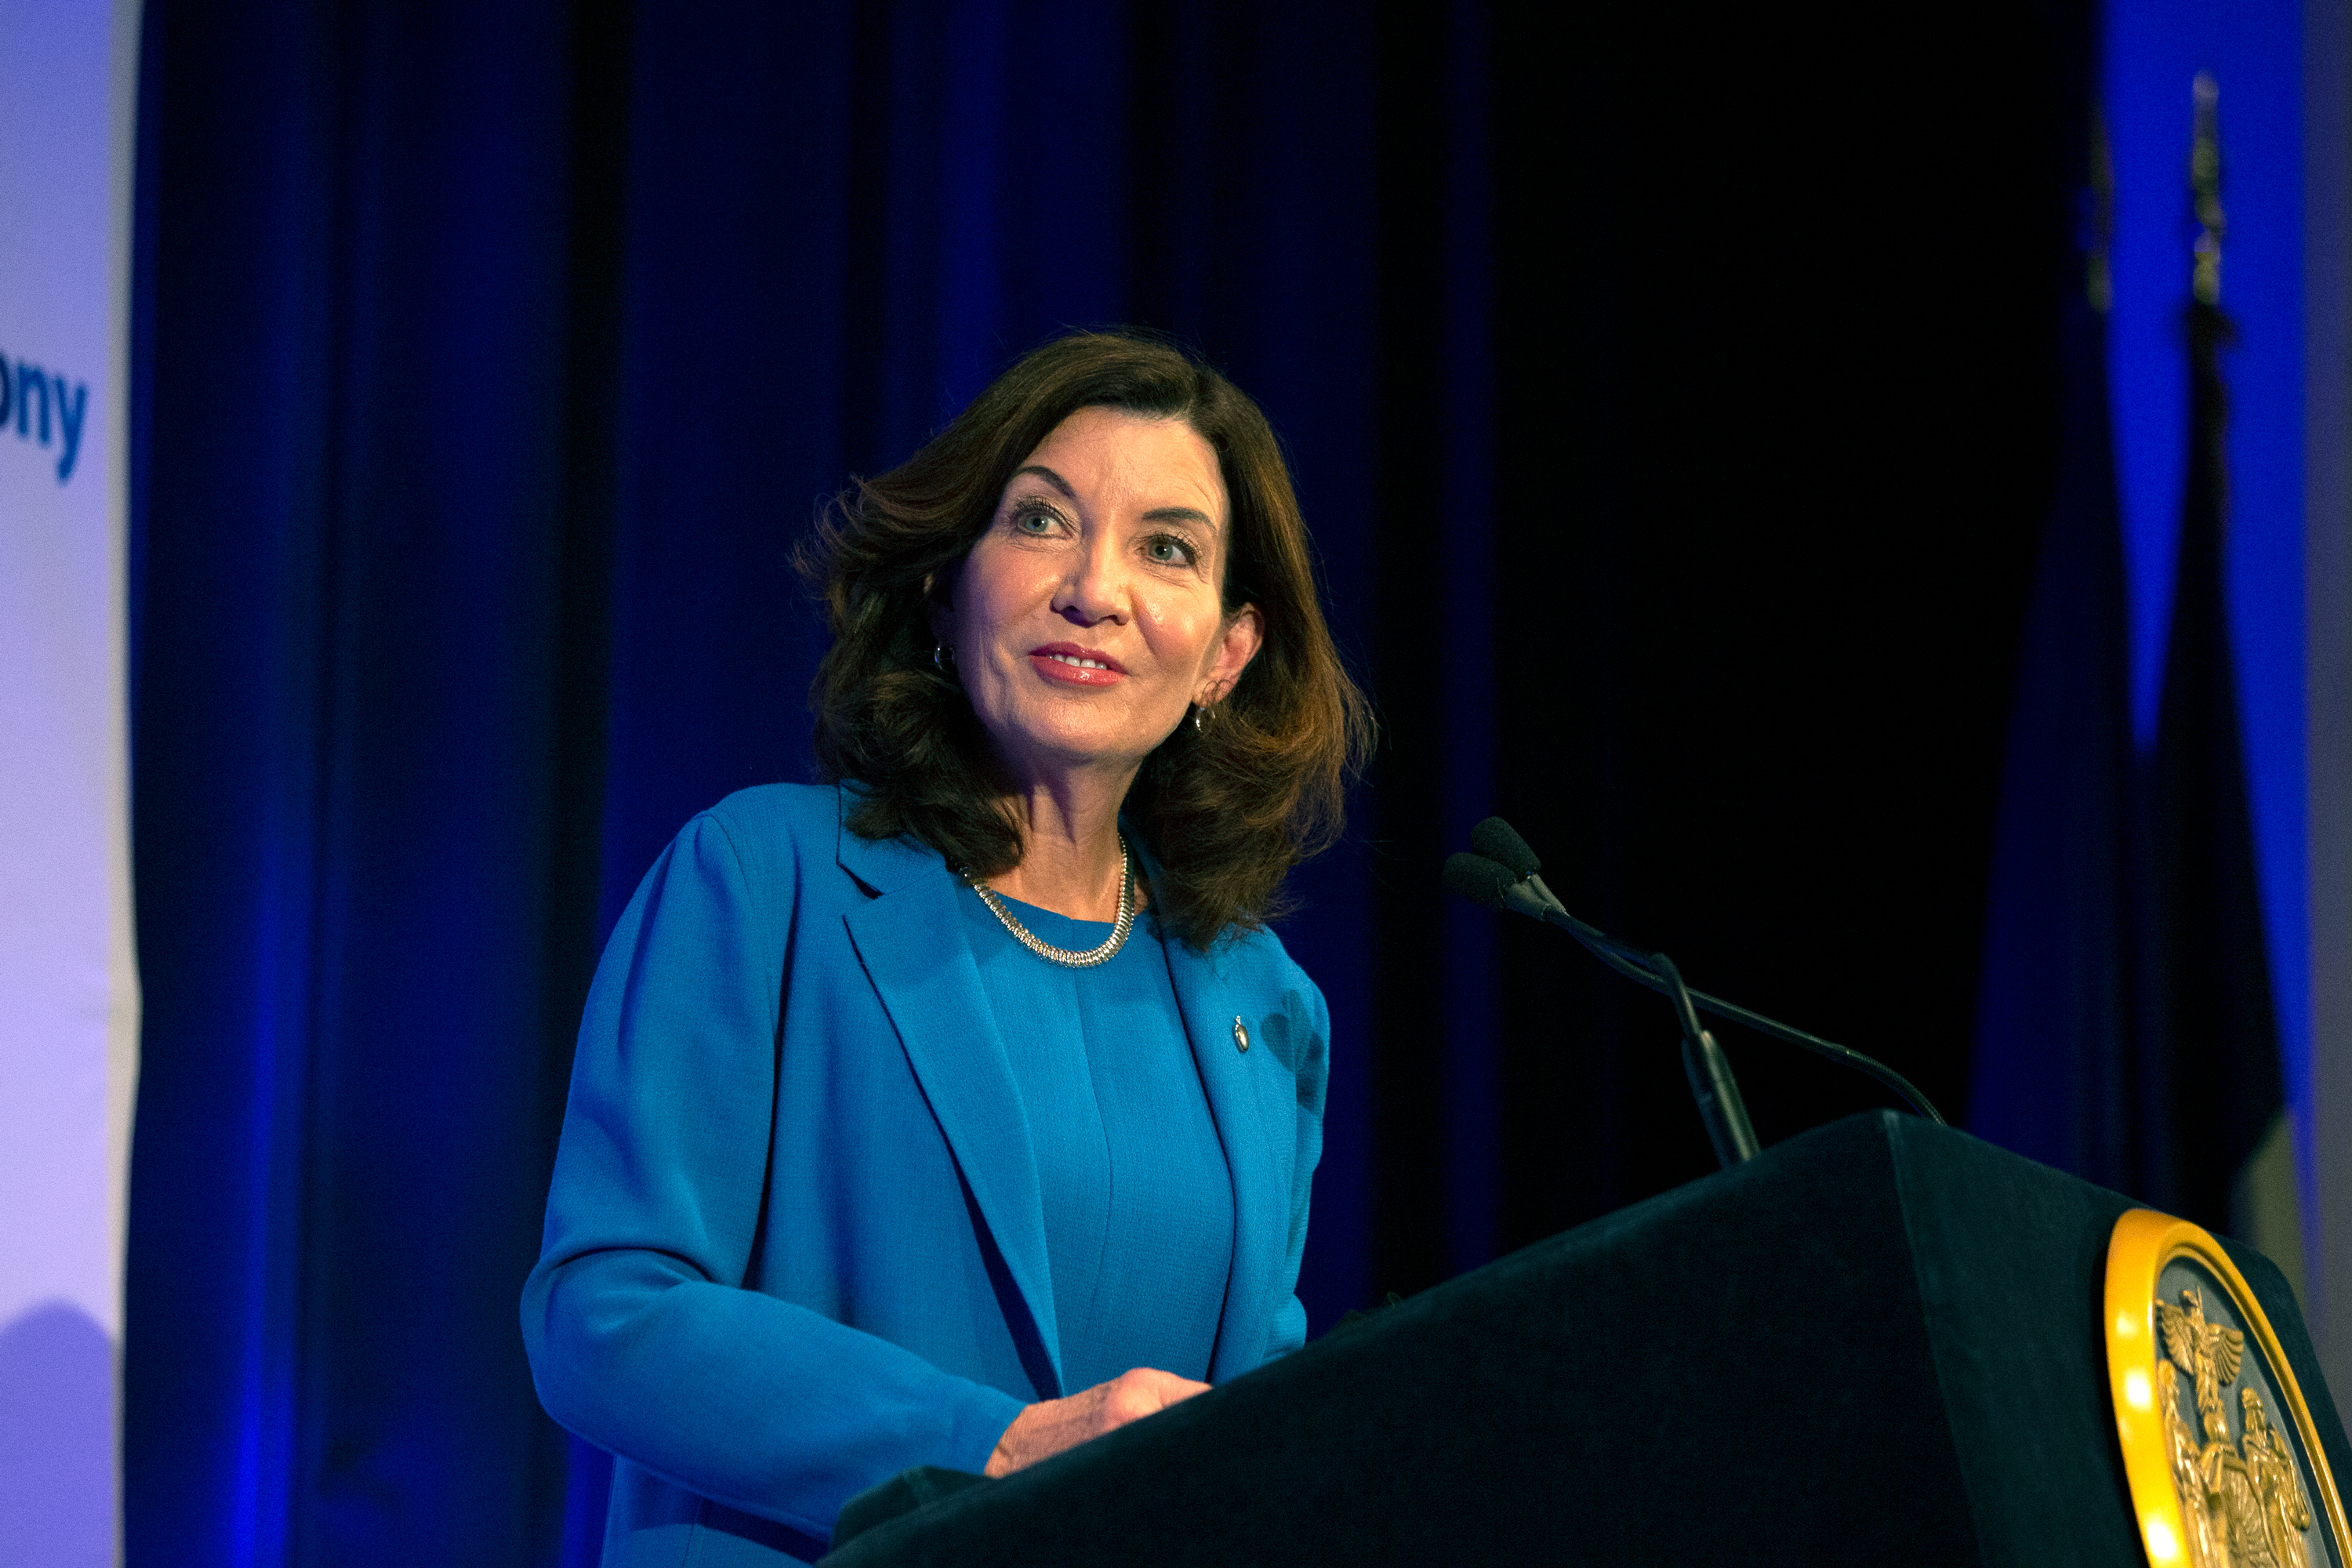 Gov. Kathy Hochul speaks at an Association for a Better New York breakfast in Midtown, Nov. 18, 2021.